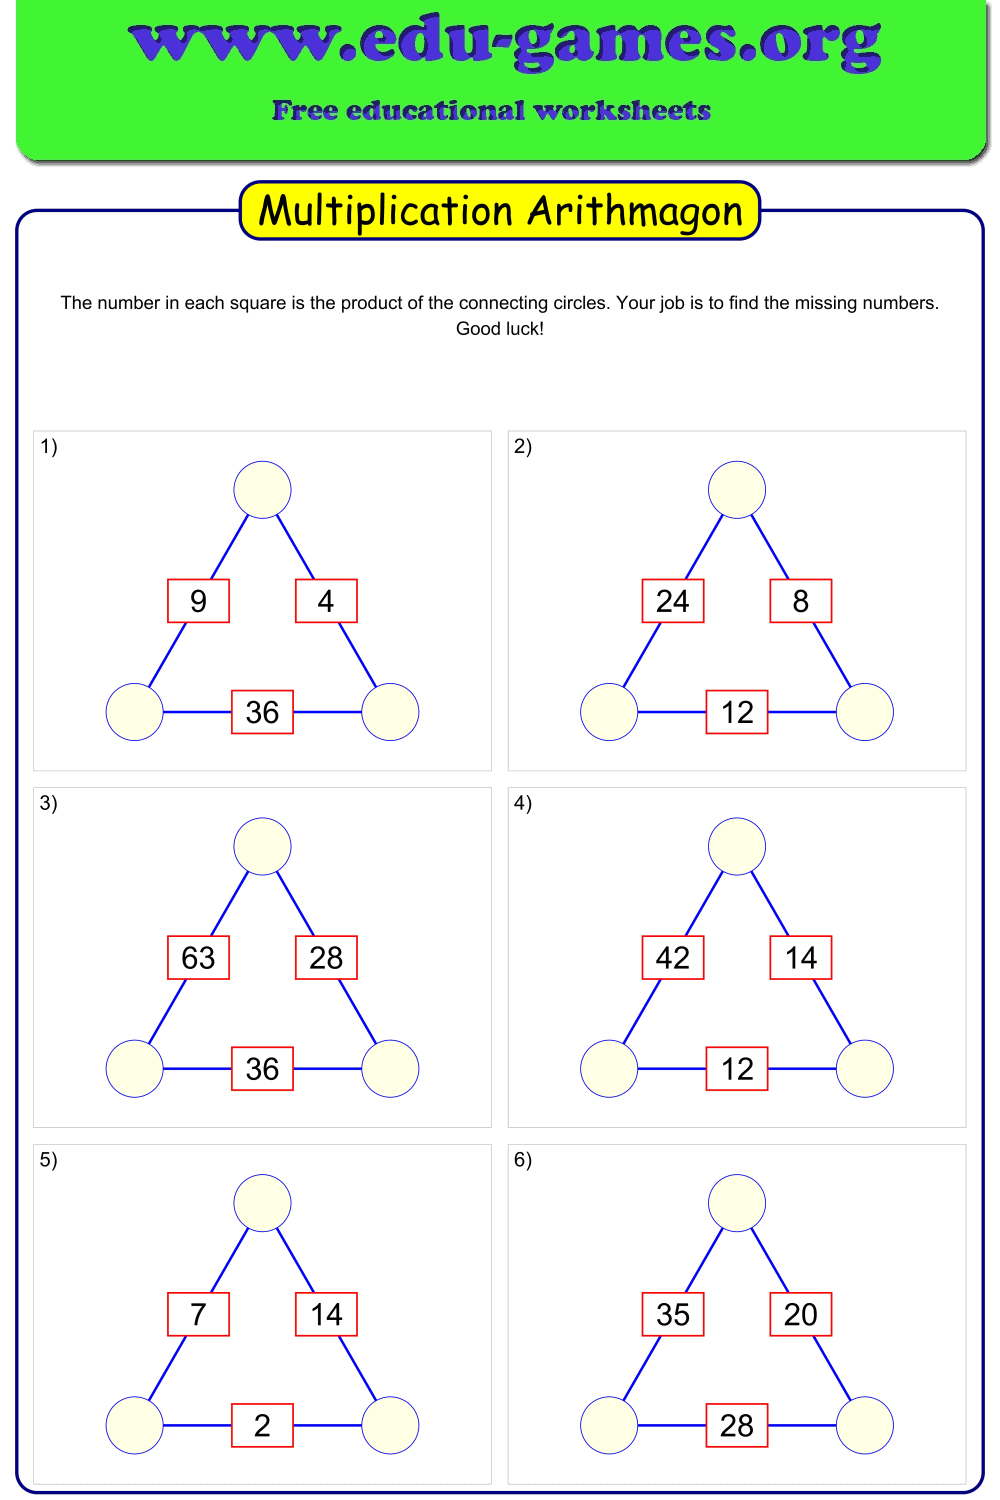 multiplication-arithmagon-png